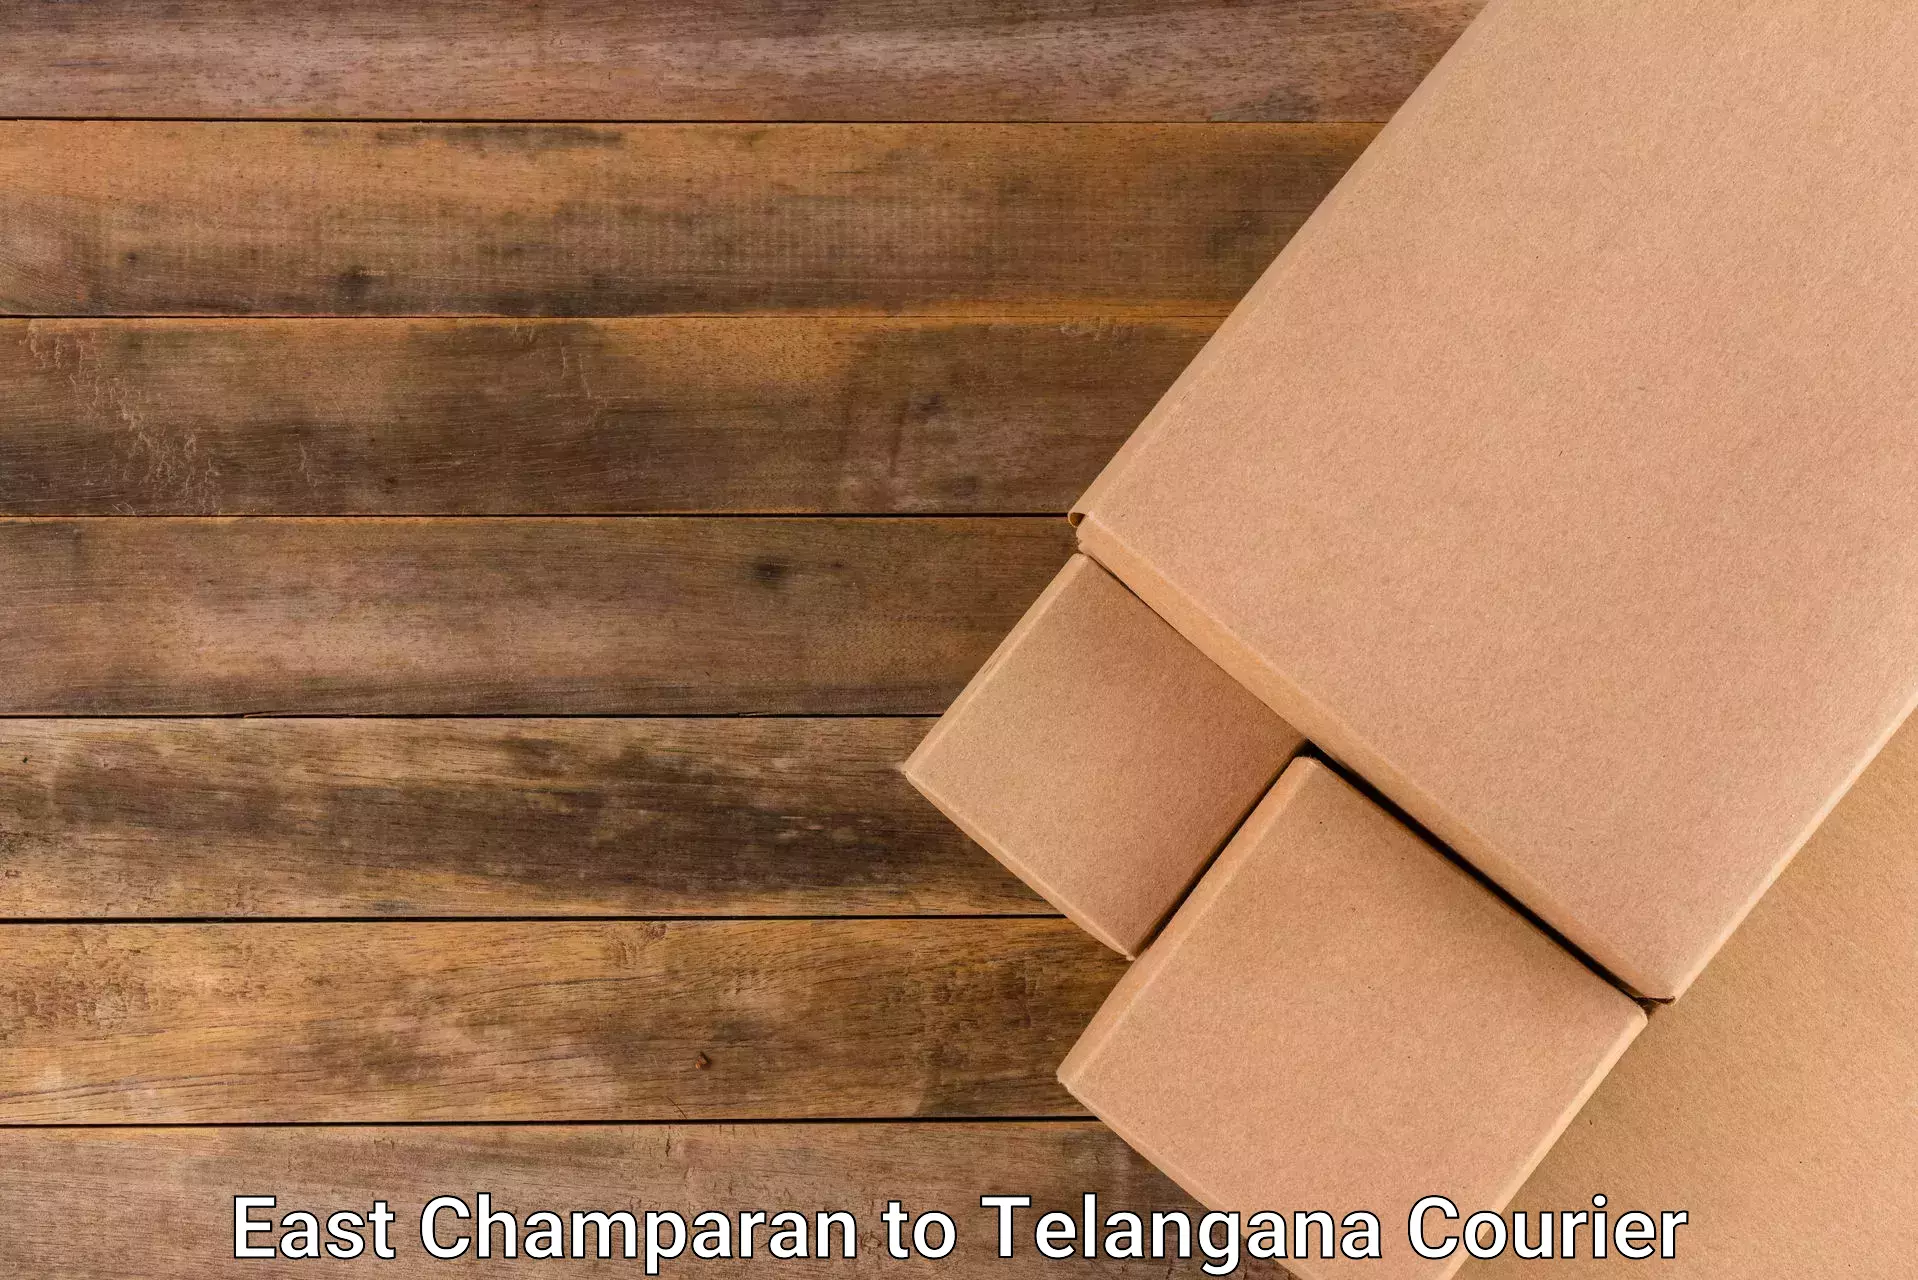 Customizable delivery plans East Champaran to Gangadhara